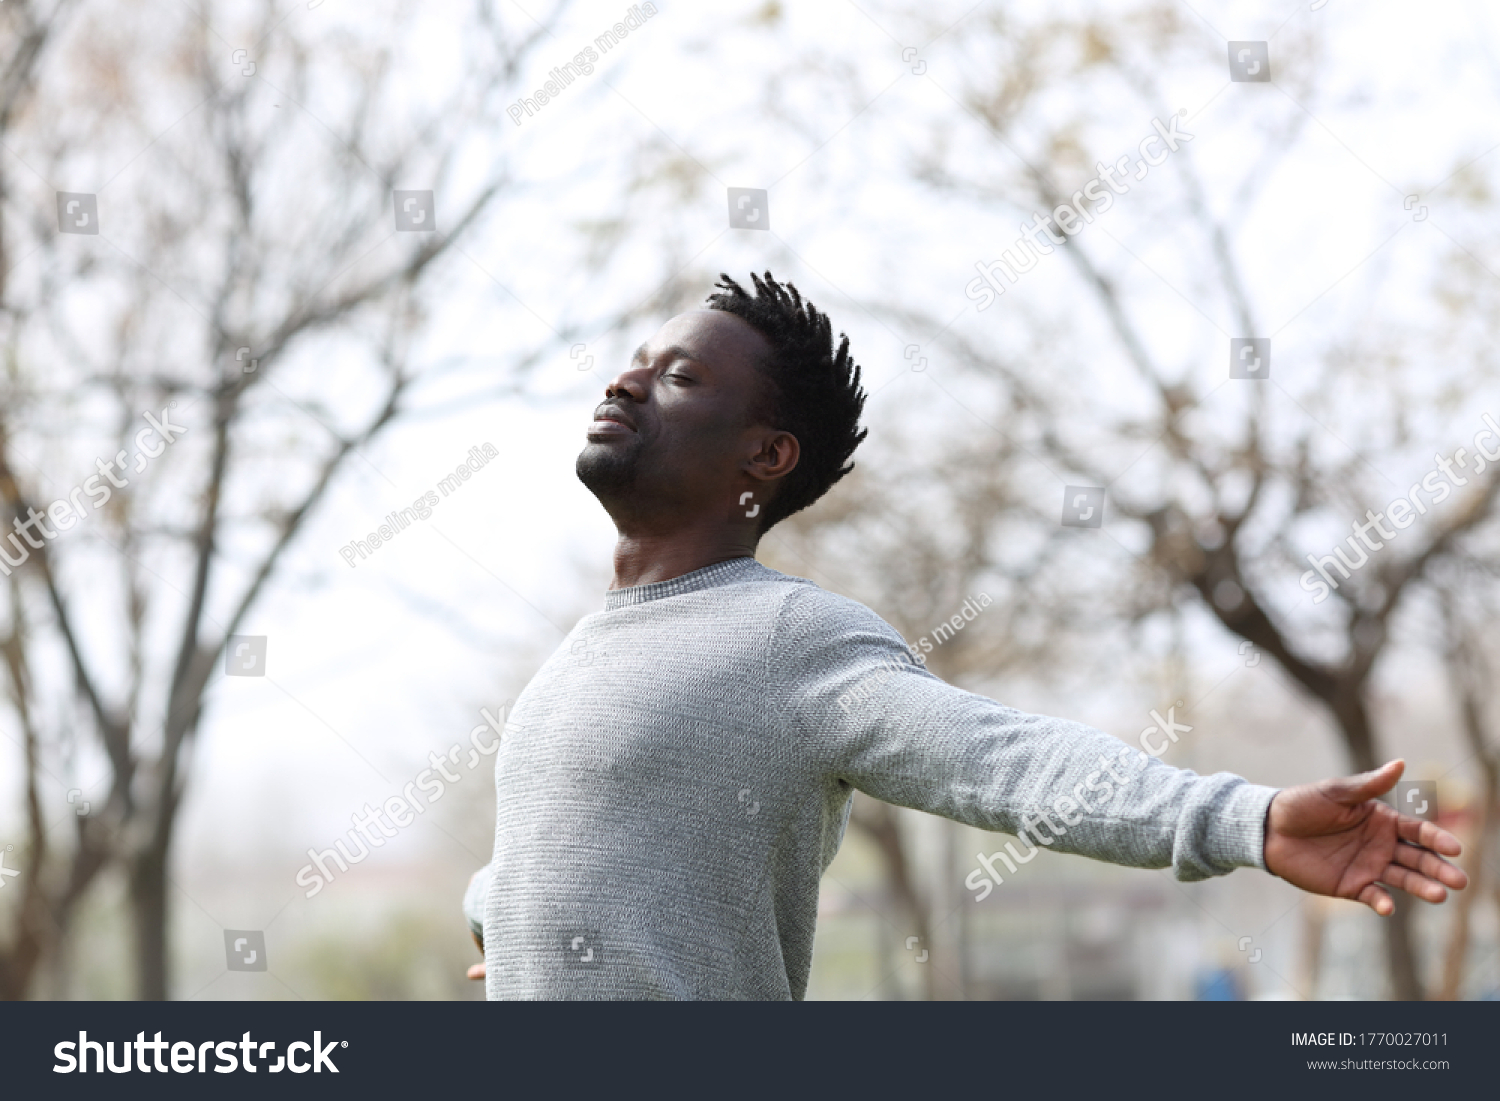 Satisfied black man breathing fresh air with eyes closed standing in the park outdoors  #1770027011